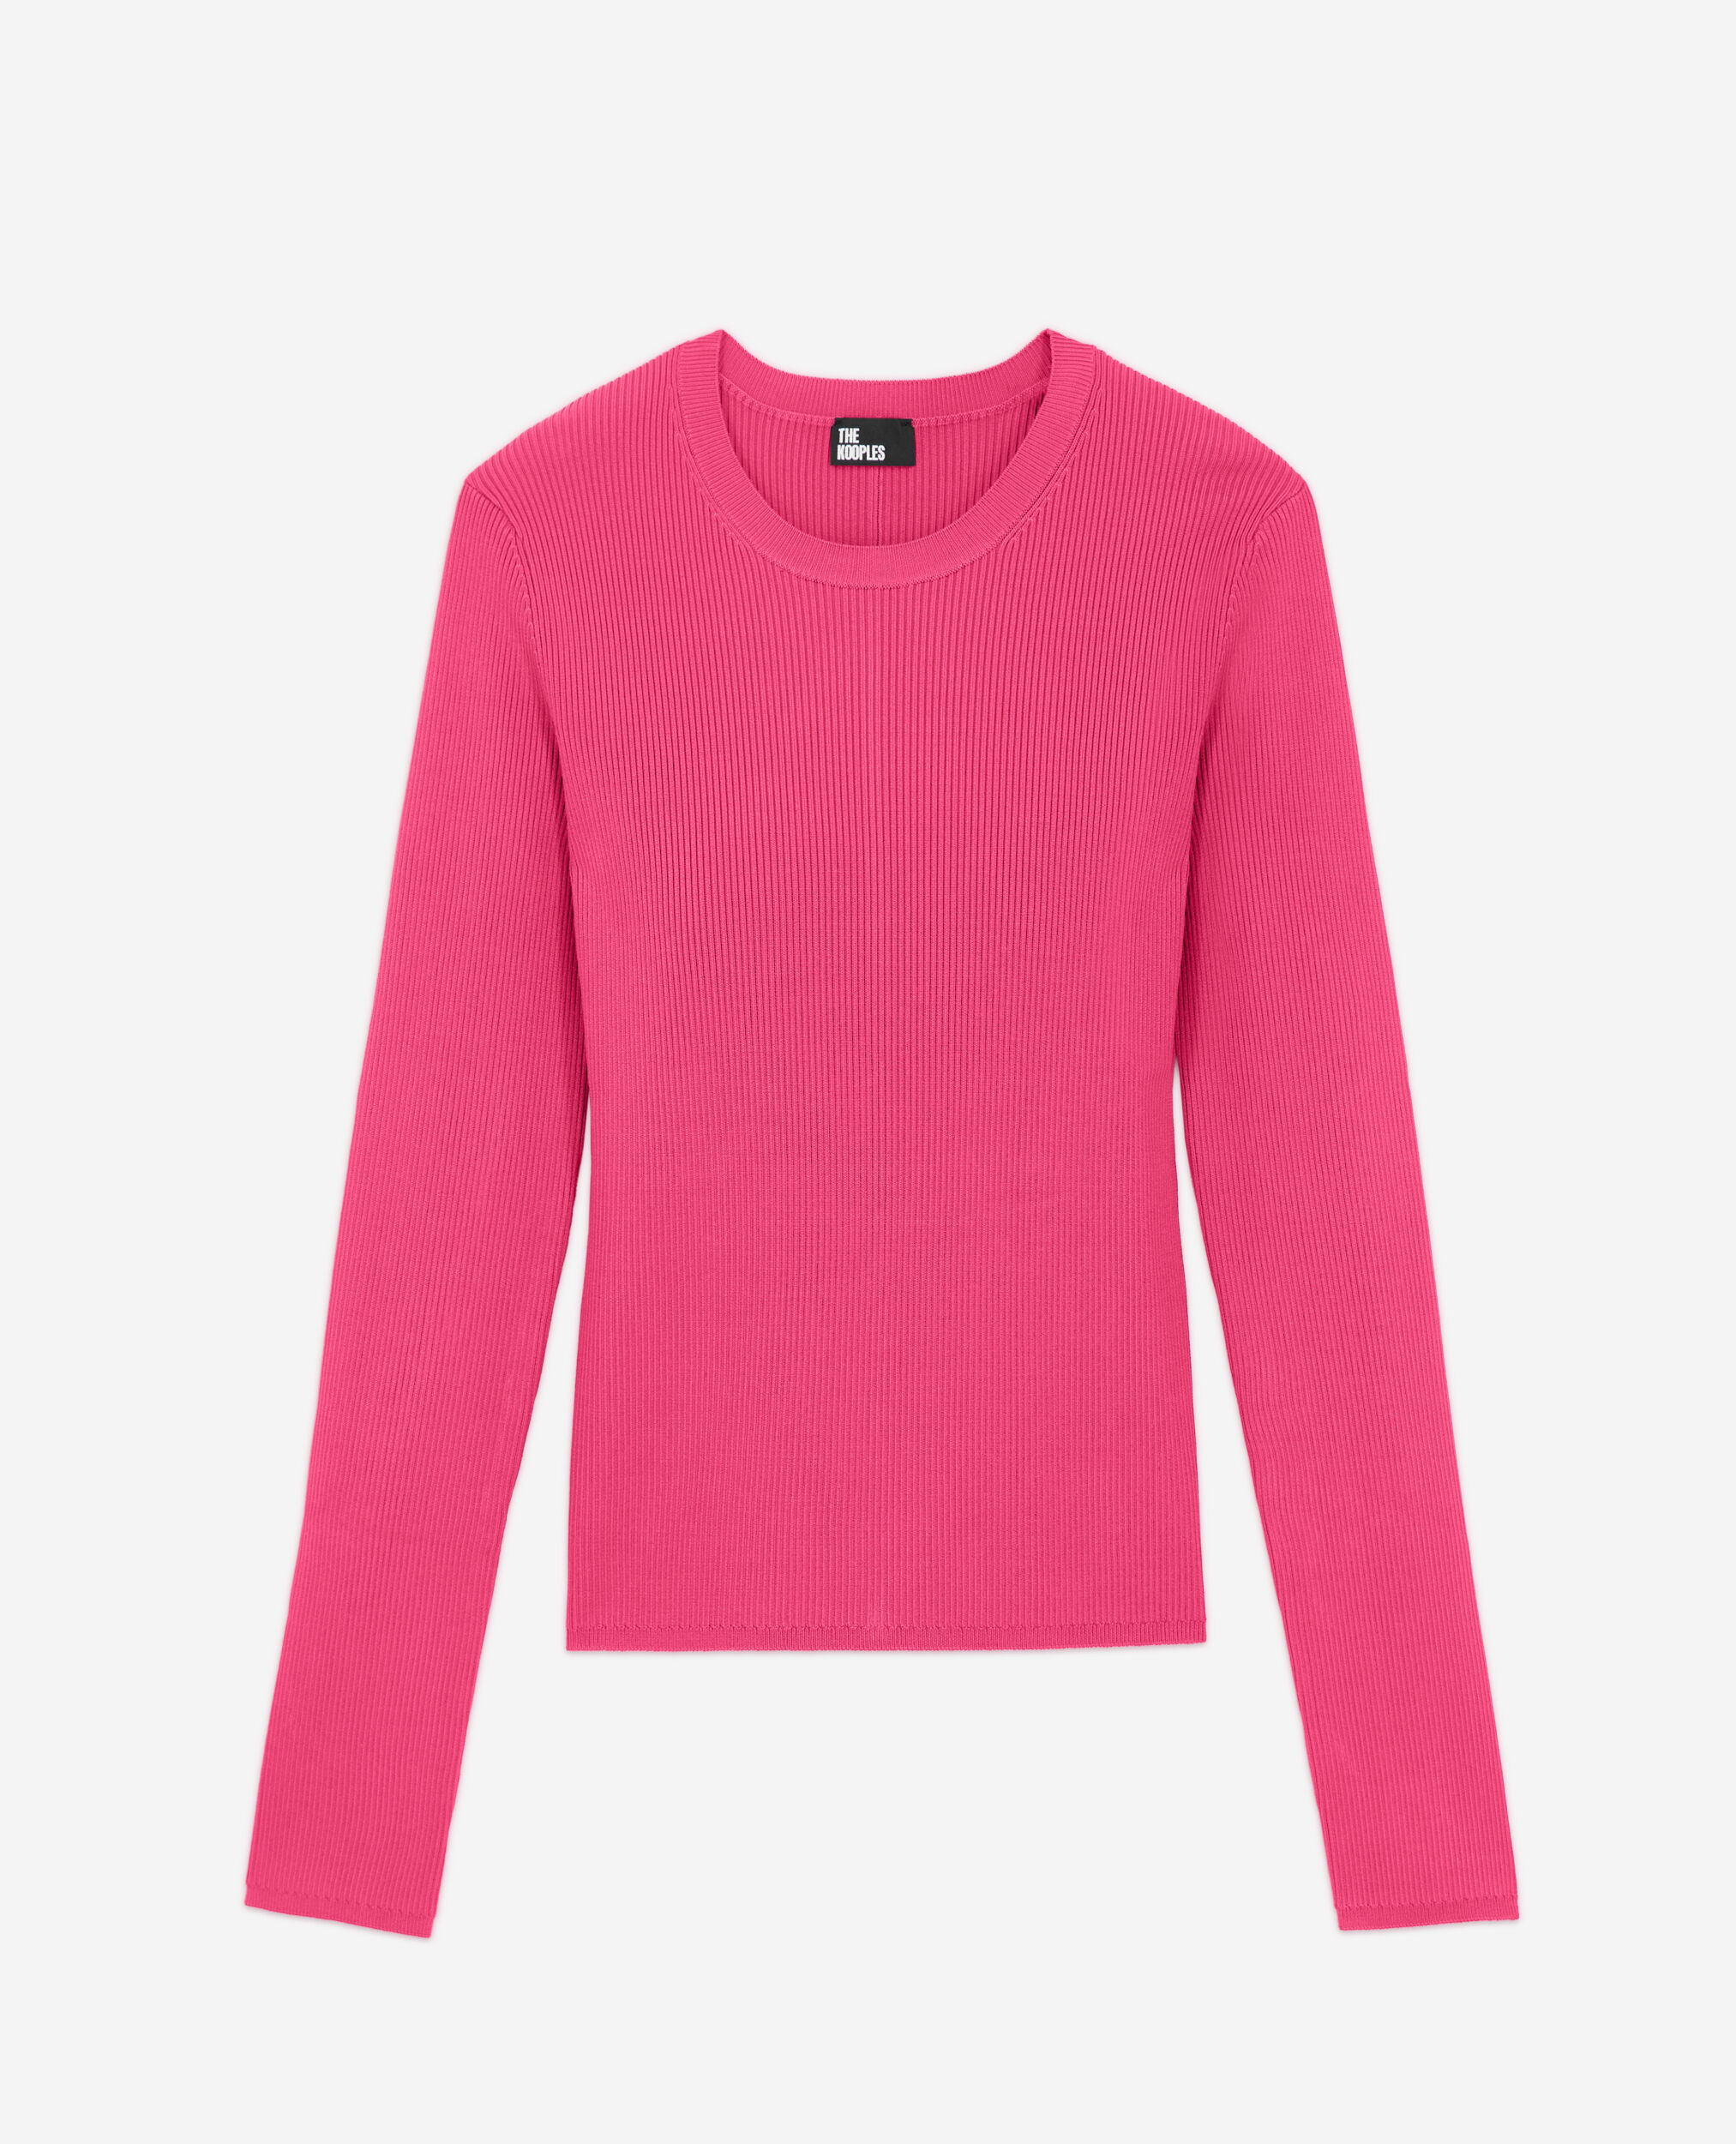 Pull col rond rose, PINK, hi-res image number null